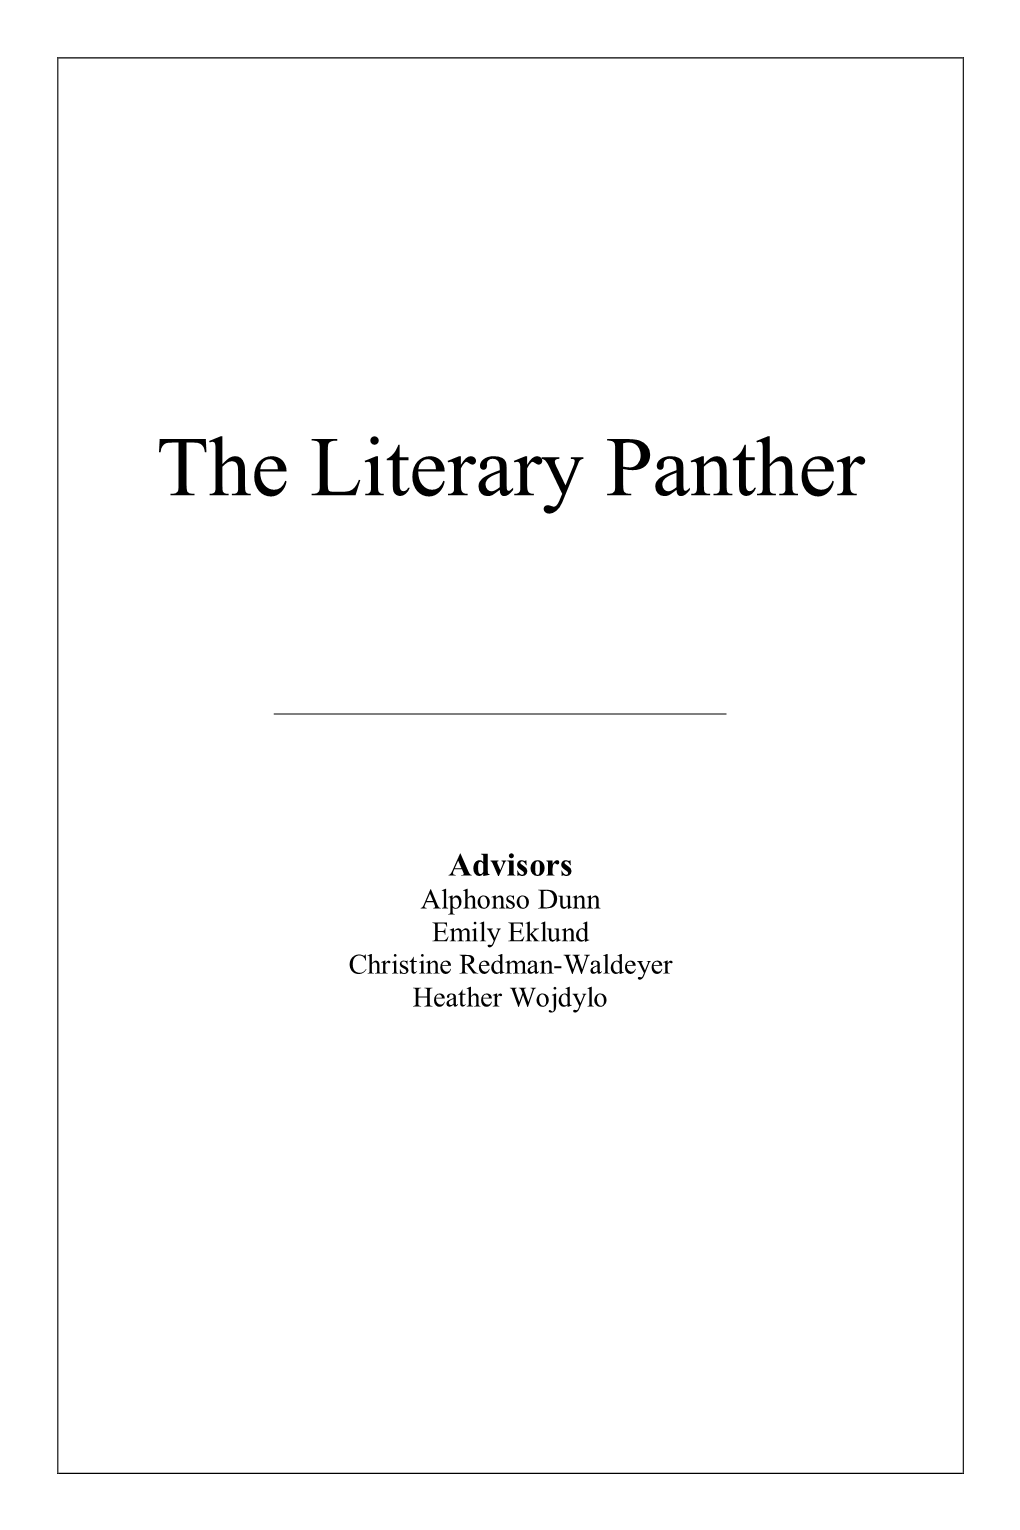 The Literary Panther